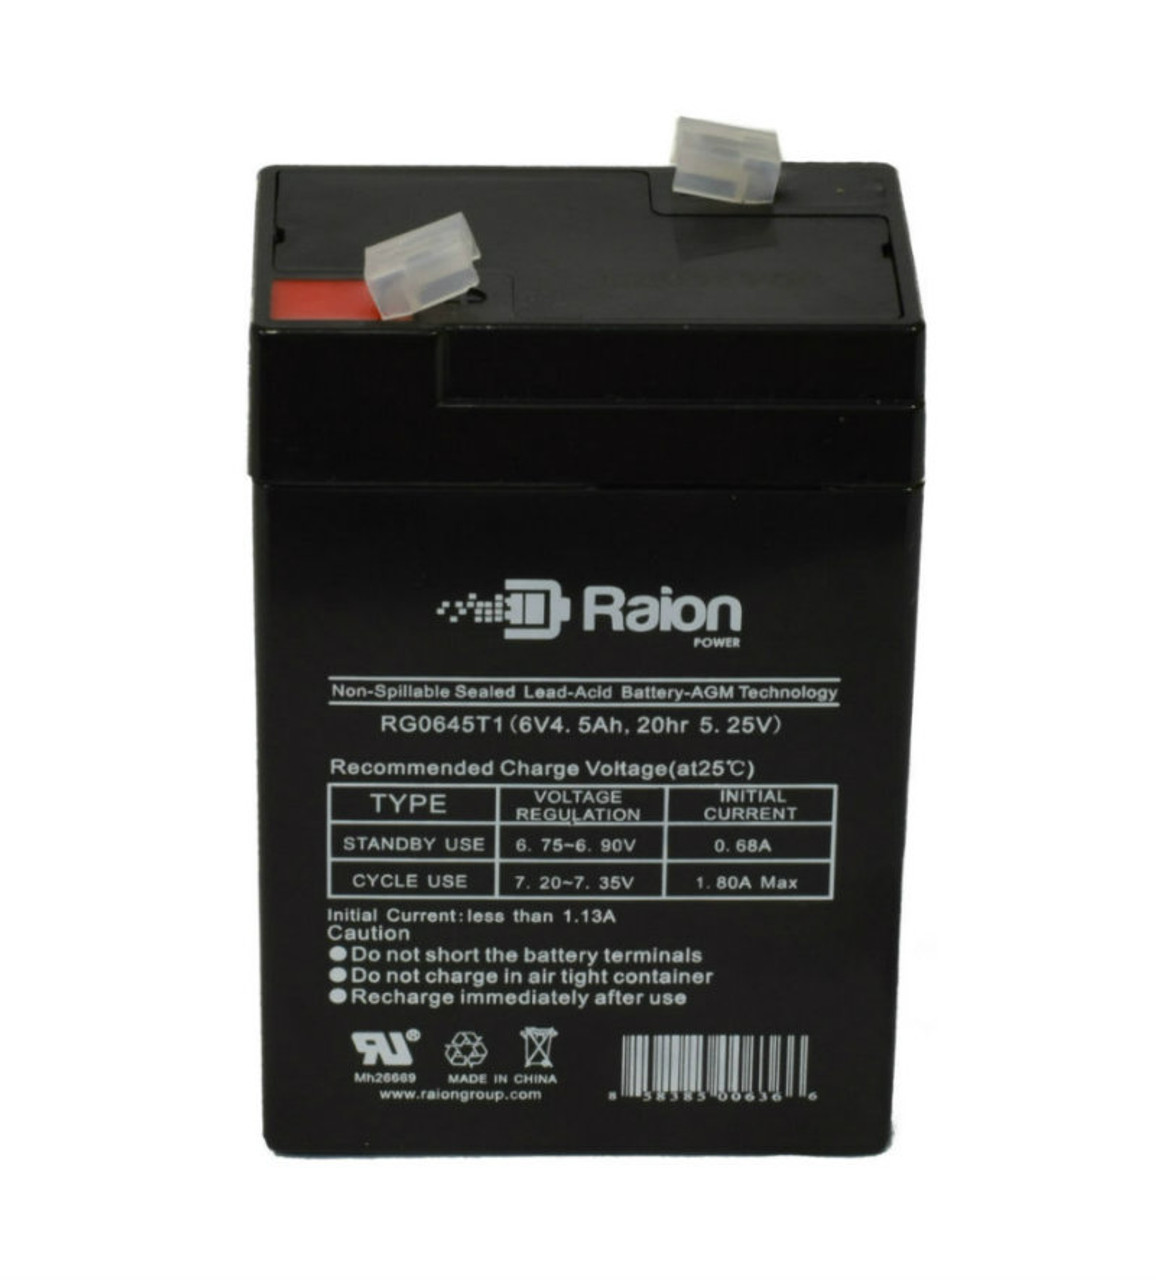 Raion Power RG0645T1 Replacement Battery Cartridge for Carpenter Watchman GS012P3